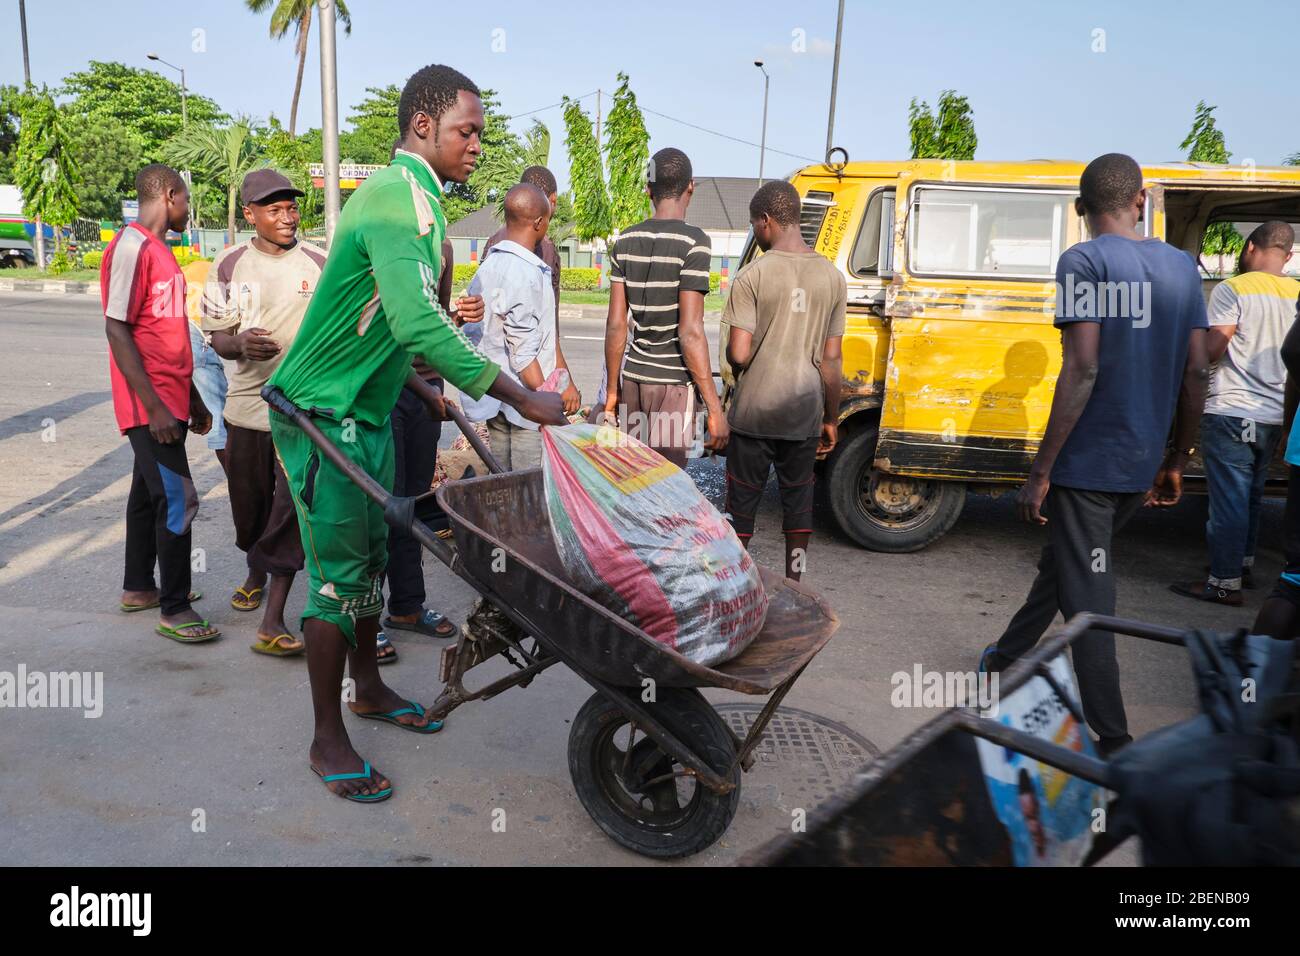 A wheelbarrow pusher lifts a bag into his wheelbarrow shortly after a bus dropped people returning from the market. Stock Photo